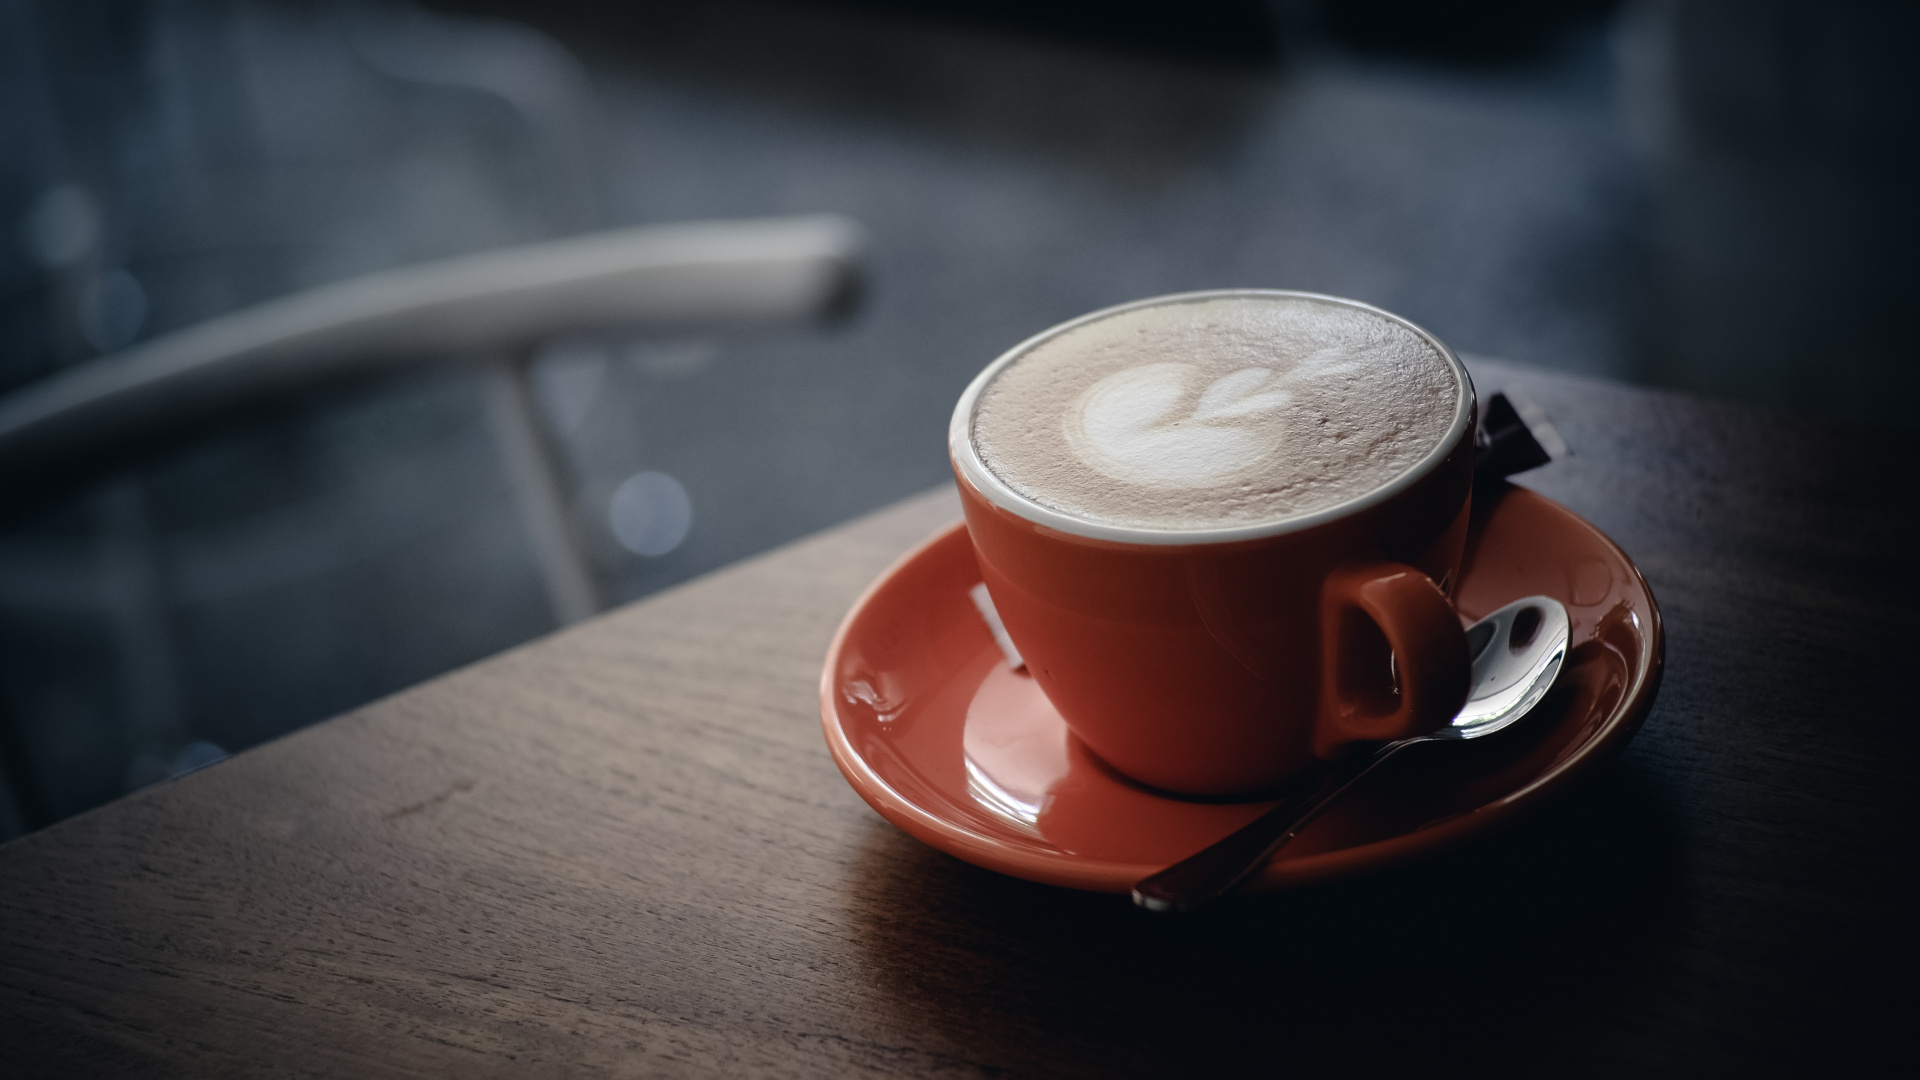 Red Ceramic Mug With Coffee on Orange Saucer. Wallpaper in 1920x1080 Resolution